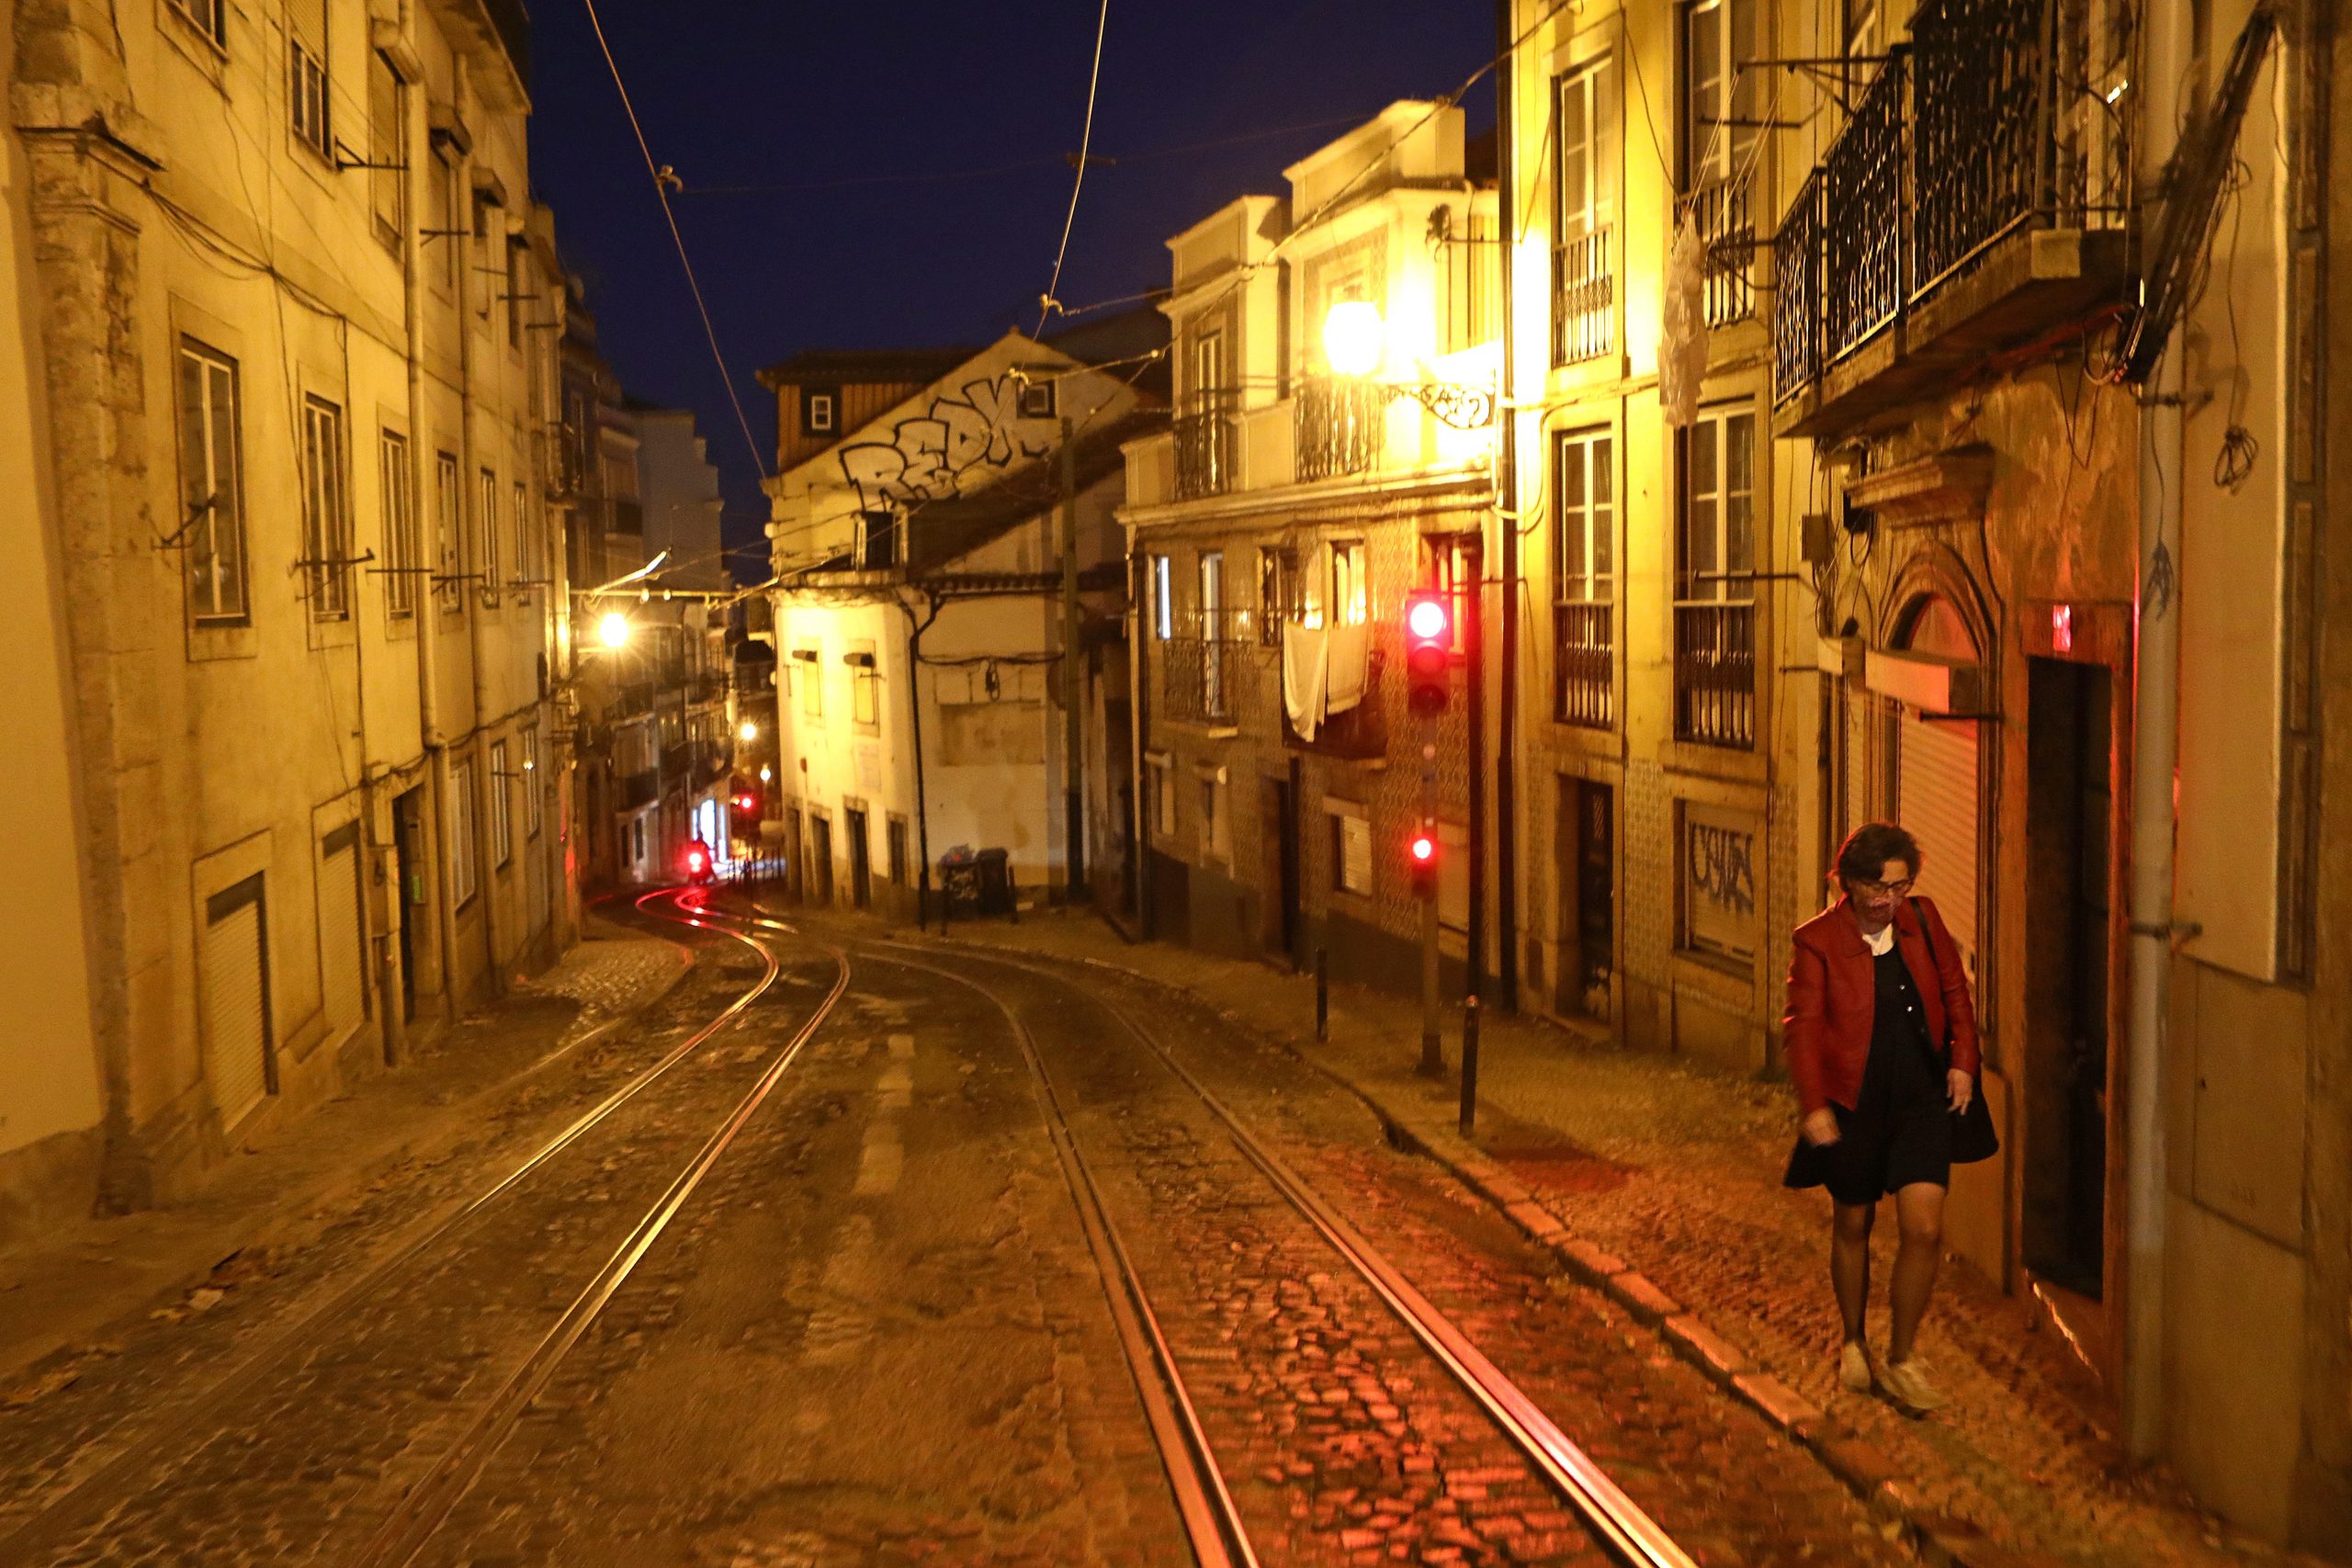 epa08835284 A woman walks in a deserted street during the lockdown of the state of emergency, as part of the measures to contain covid-19, in Lisbon, late 21 November 2020. With 213 municipalities at risk in Portugal, the Council of Ministers decreed over the weekend the closure of all shops and restaurants from 1 pm to 8 am the following day, in addition to the mandatory confinement for the entire population of these municipalities from 1 pm.  EPA/ANTONIO PEDRO SANTOS